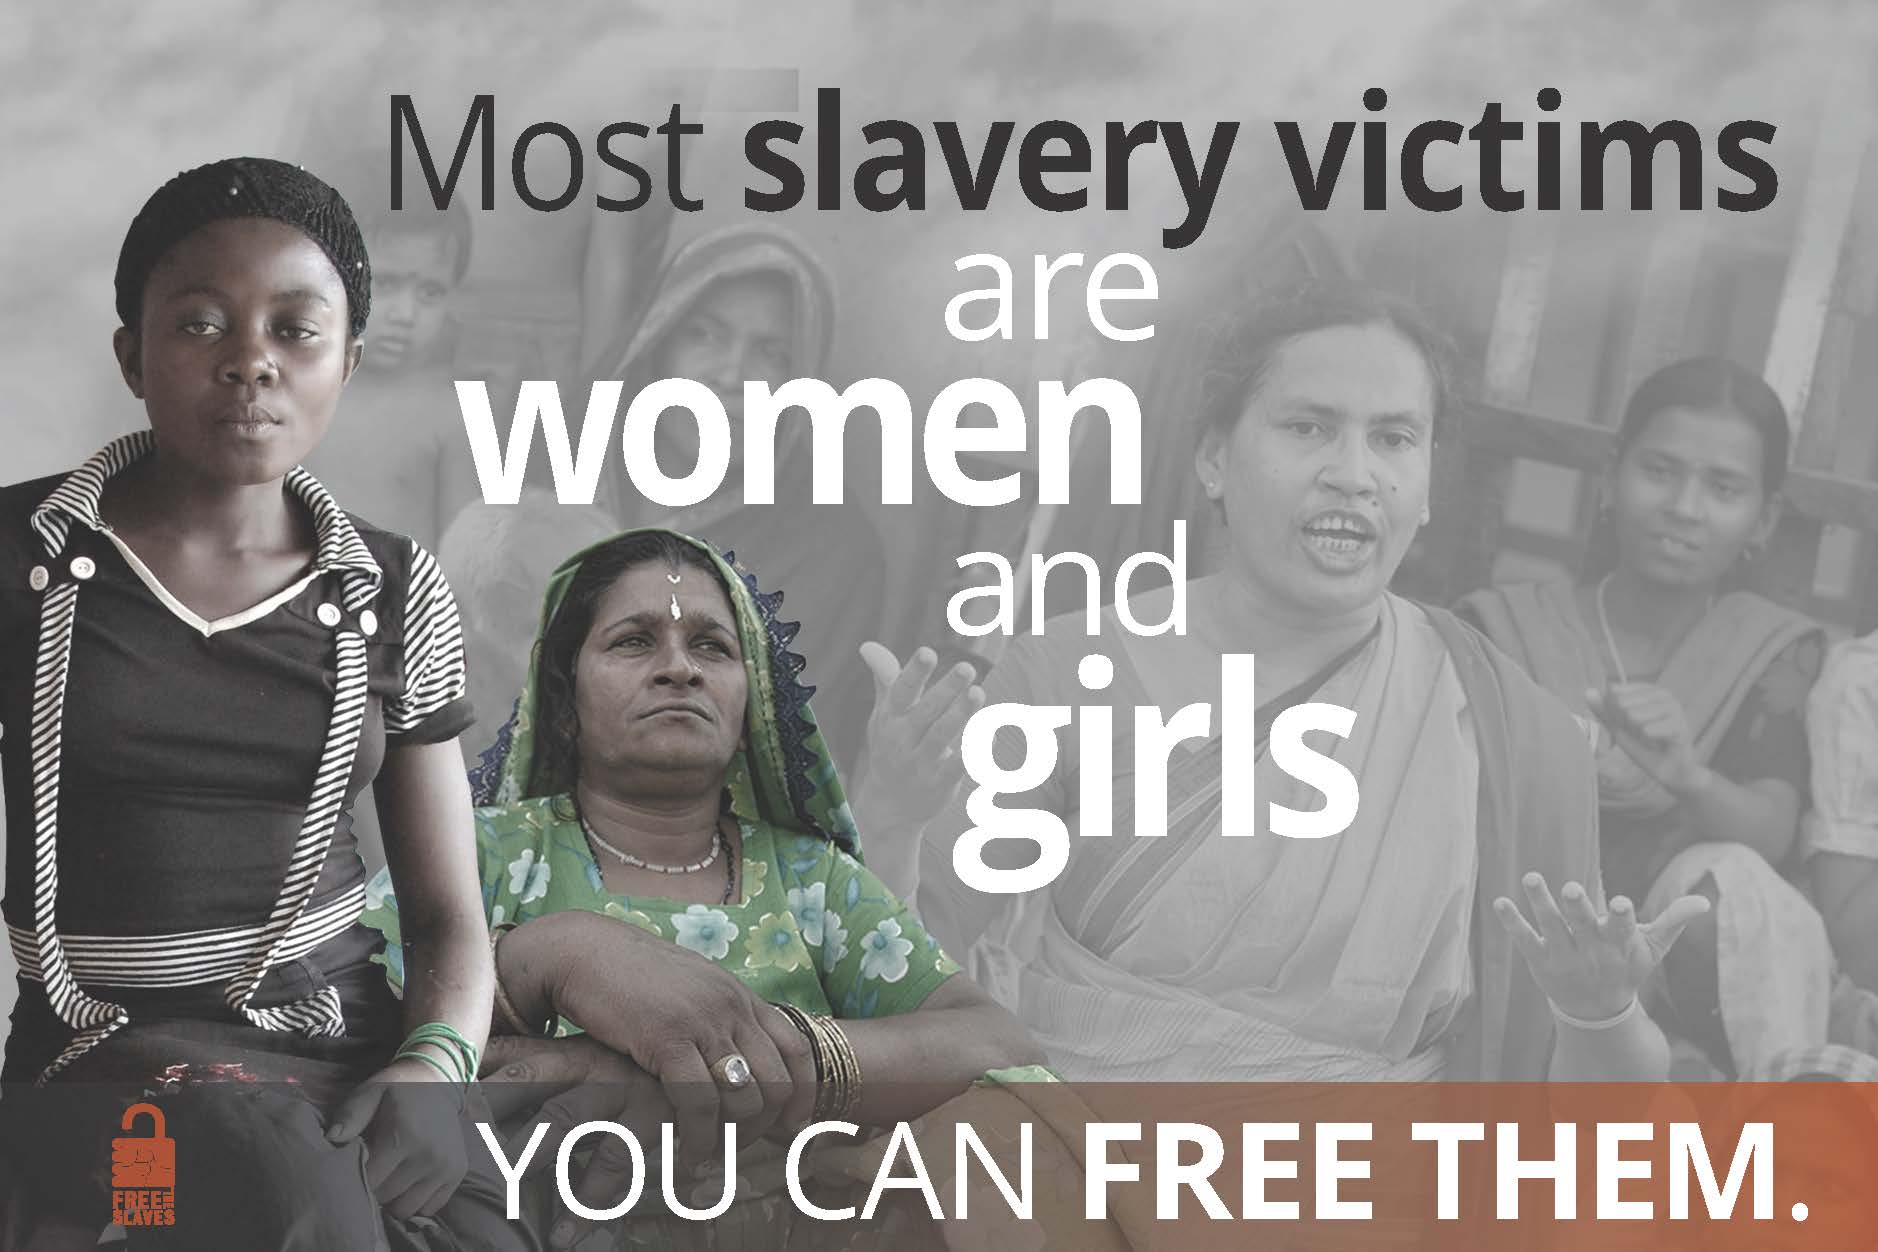 Taking a Stand for People in Slavery « Free the Slaves